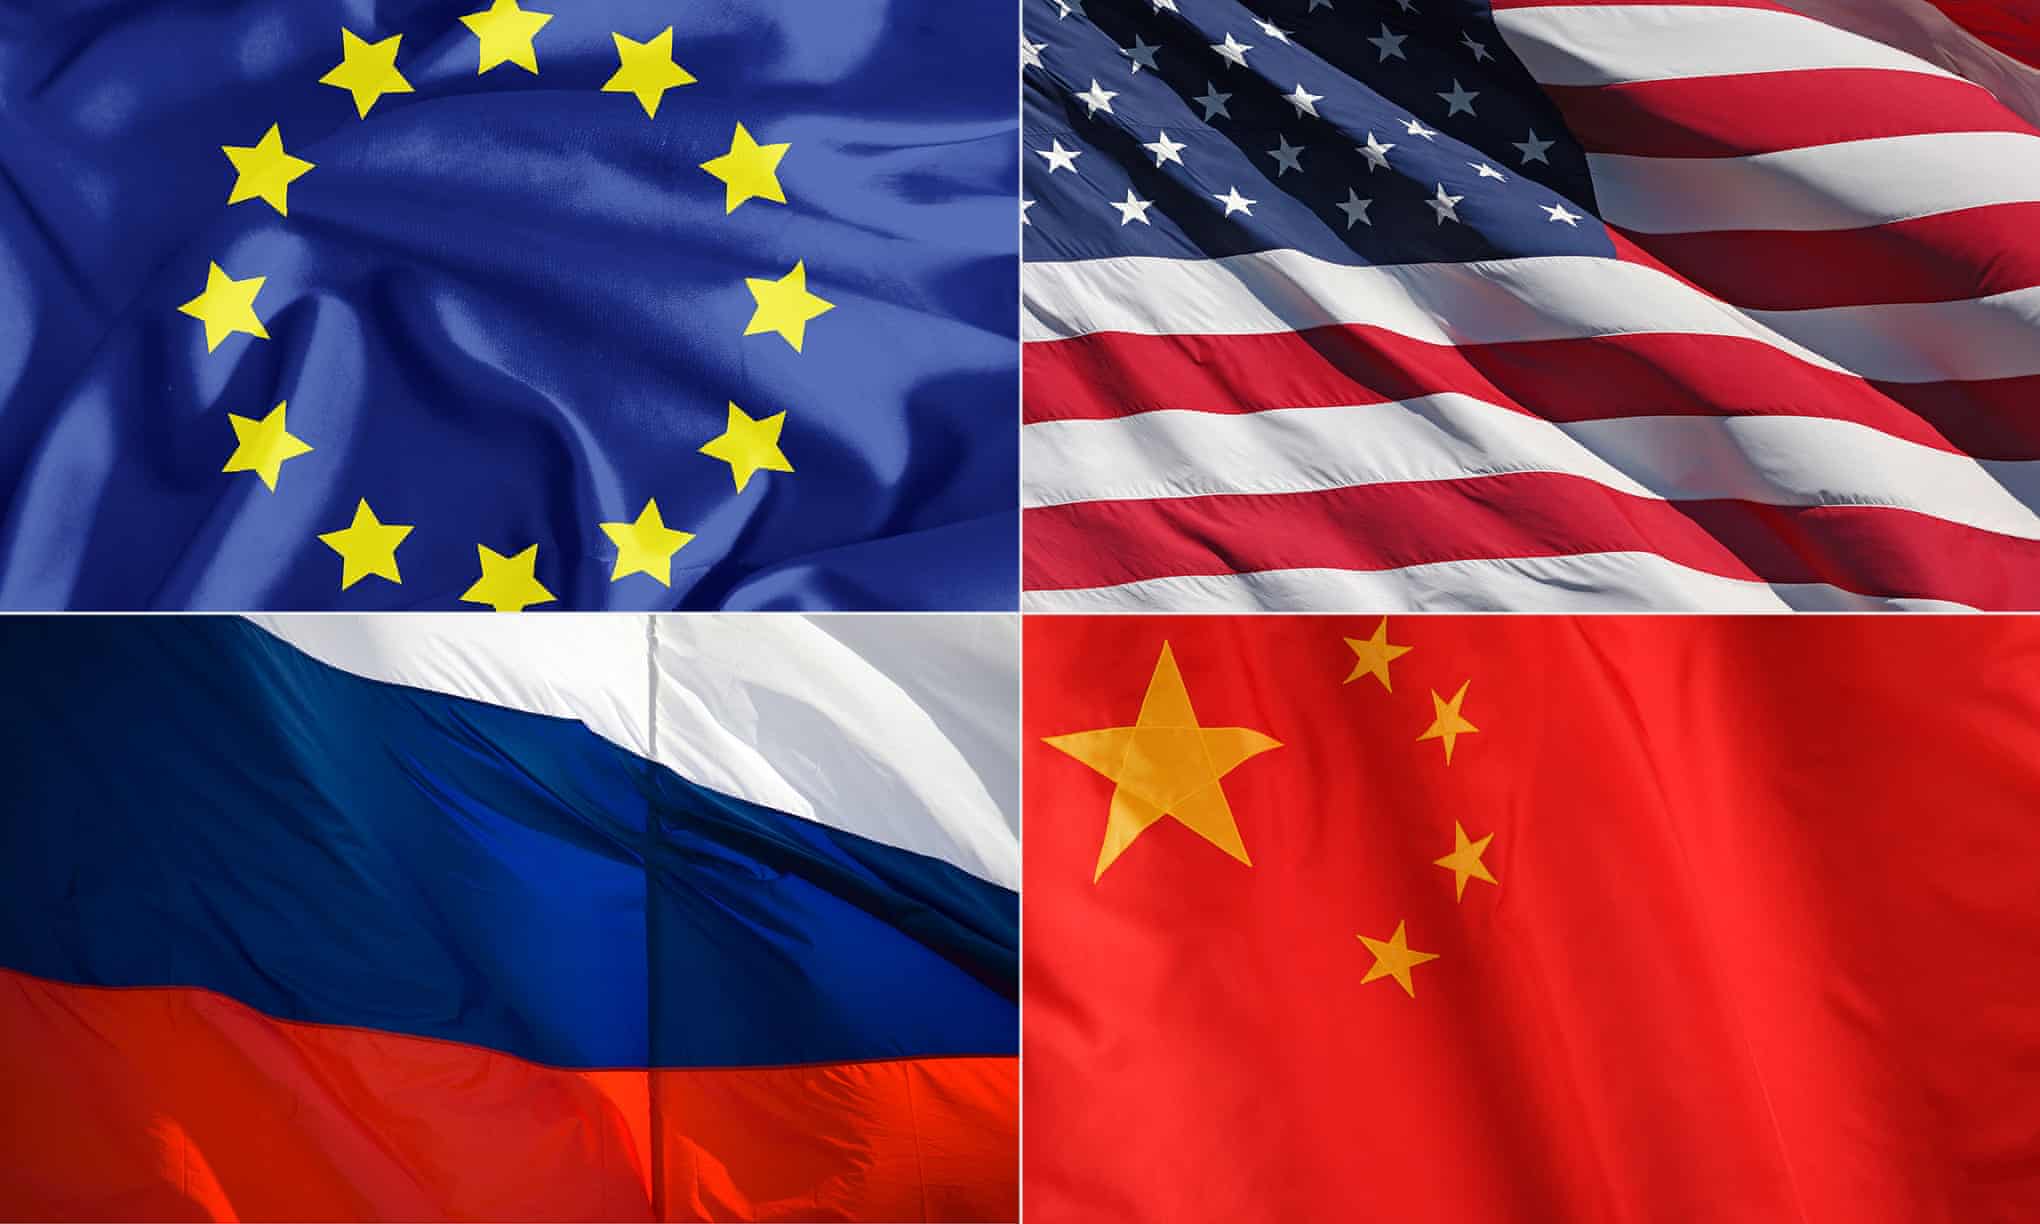 Flags (from top left) of the EU, US, Russian and China.